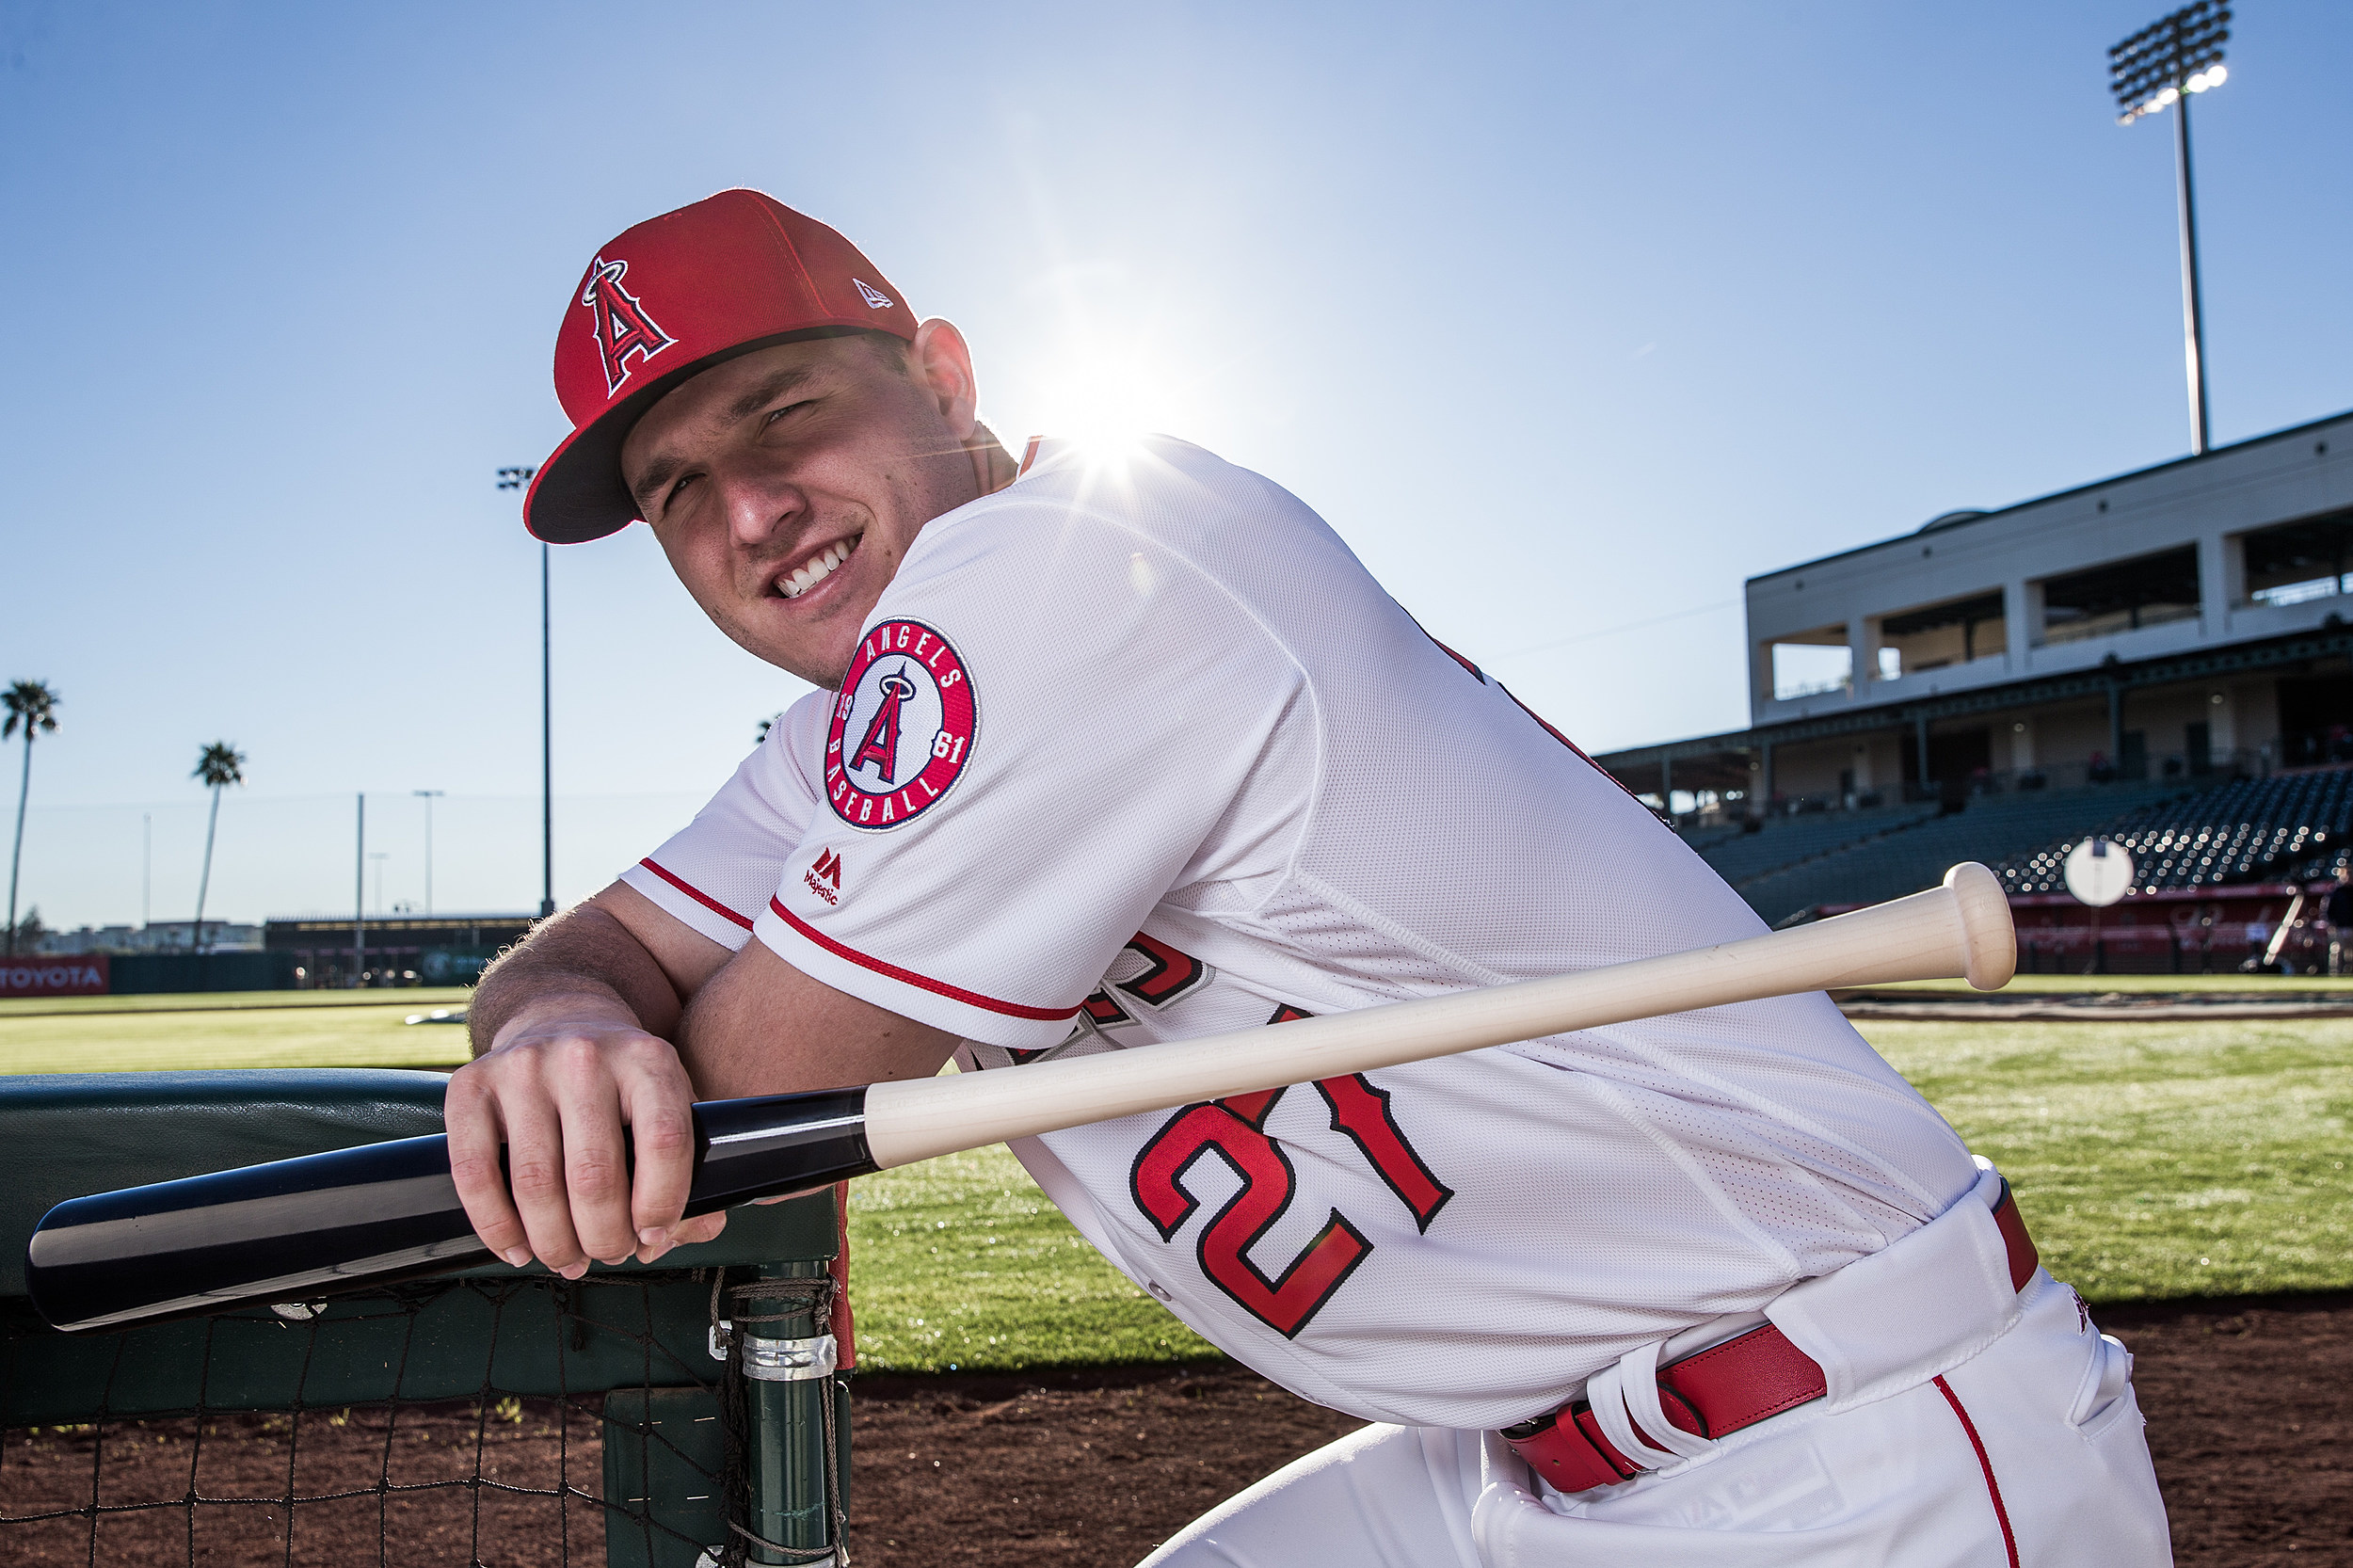 Angels star and N.J. native Mike Trout is 1 homer away from MLB